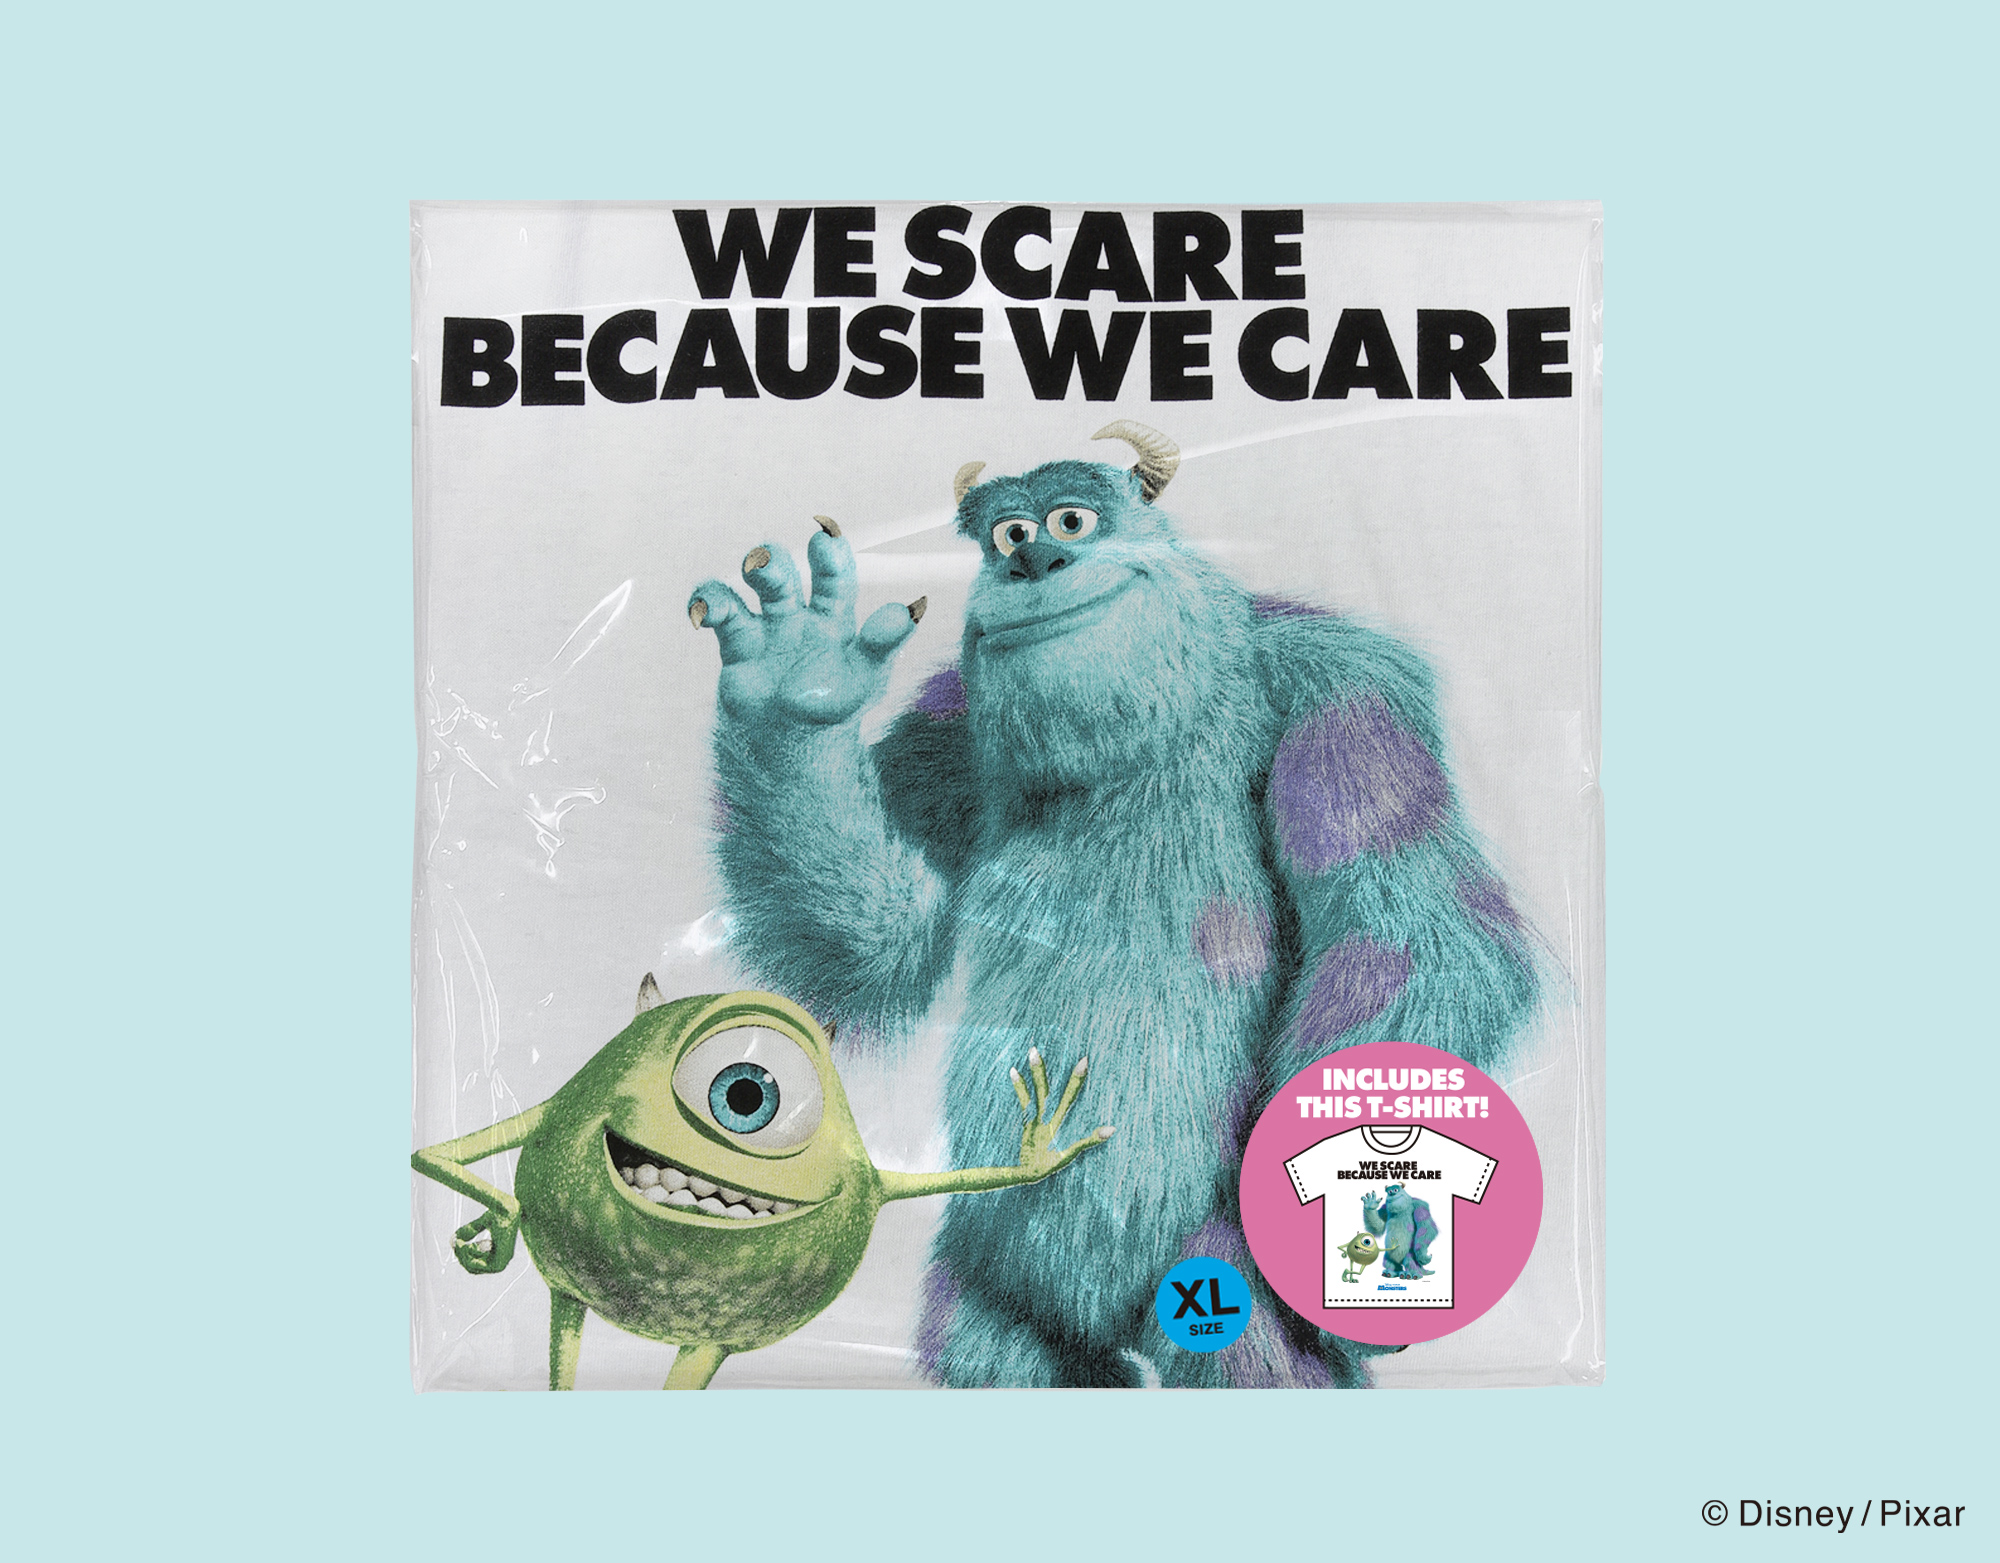 weber Monsters, Inc. CAPSULE COLLECTION – JUN WATANABE